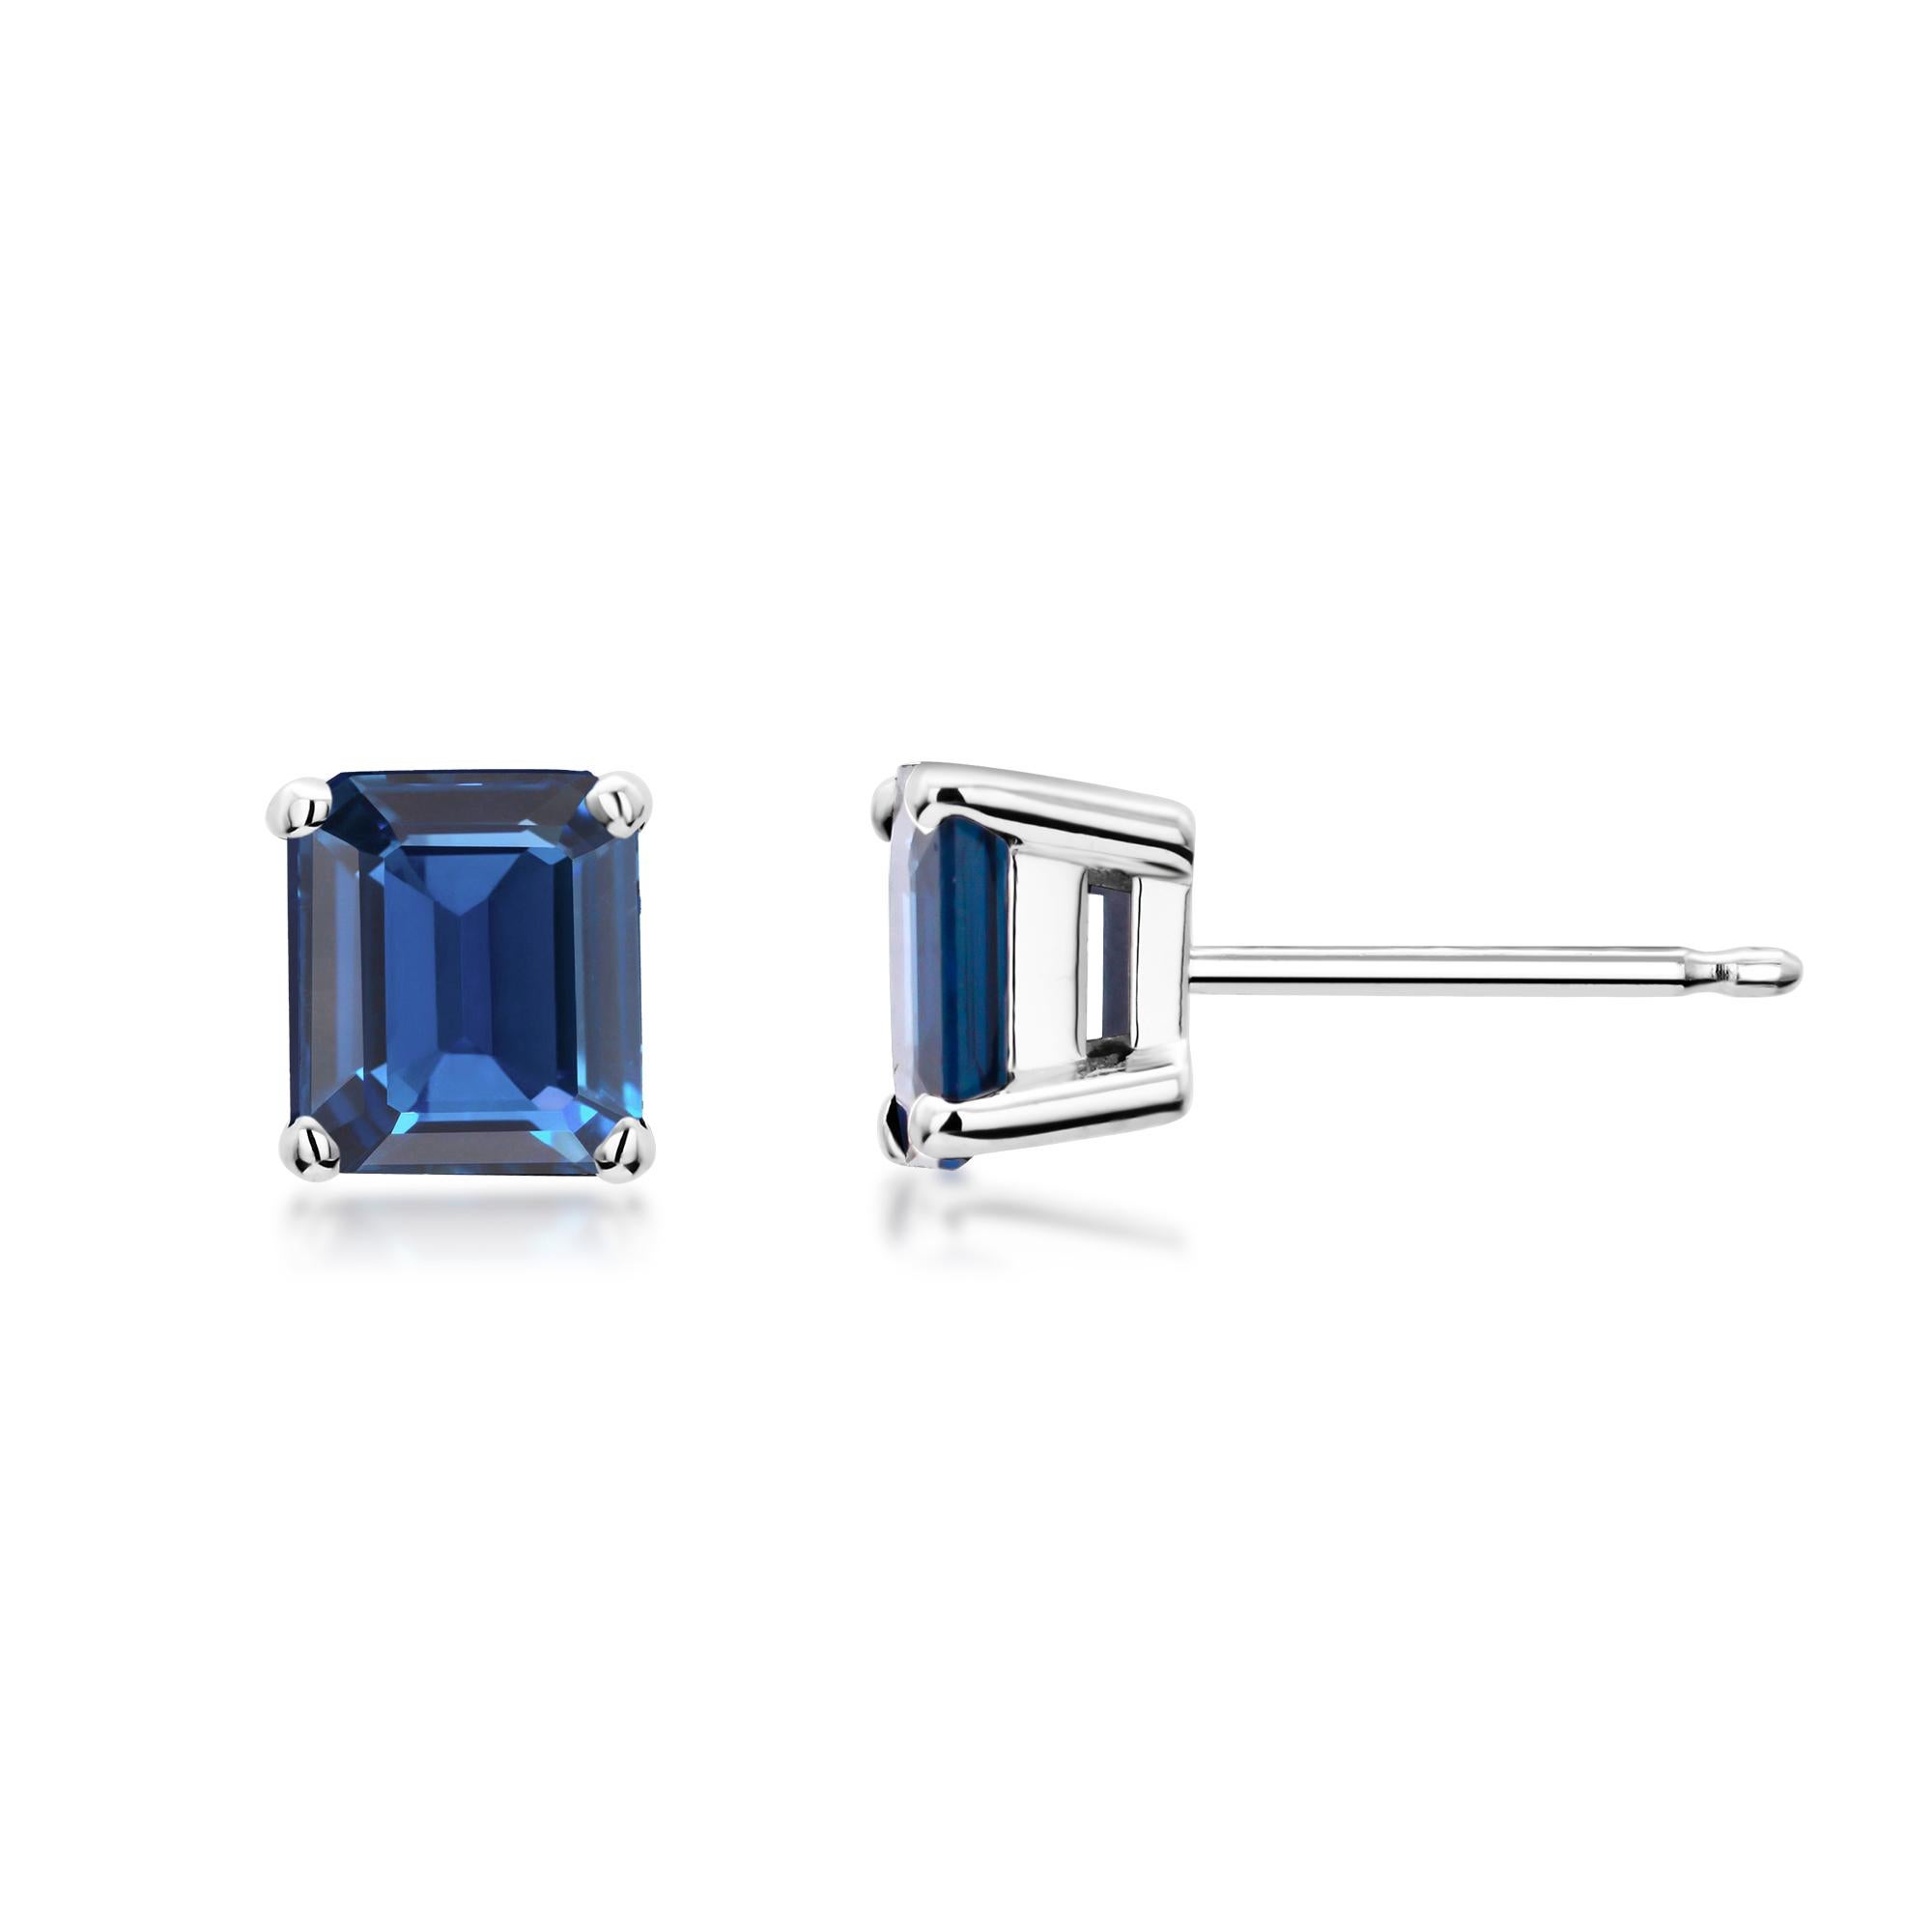 Contemporary White Gold Emerald Cut Sapphires Stud Earrings Weighing 1.61 Carat